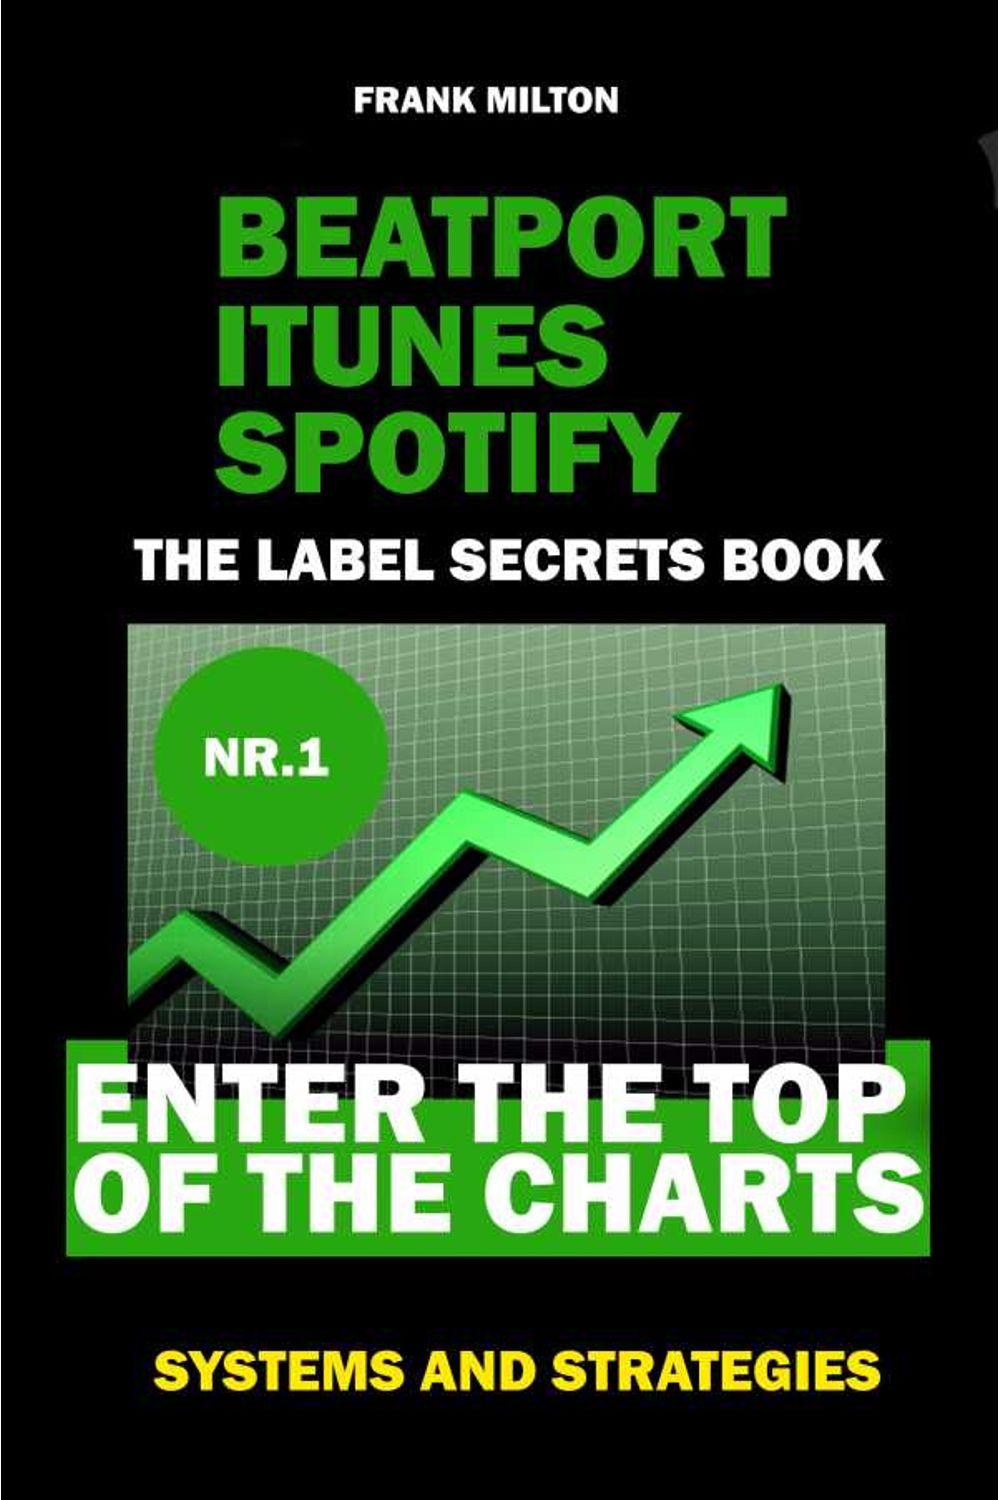 bw-beatport-itunes-spotify-the-label-secrets-book-enter-the-top-of-the-charts-music-secret-news-9783961126149